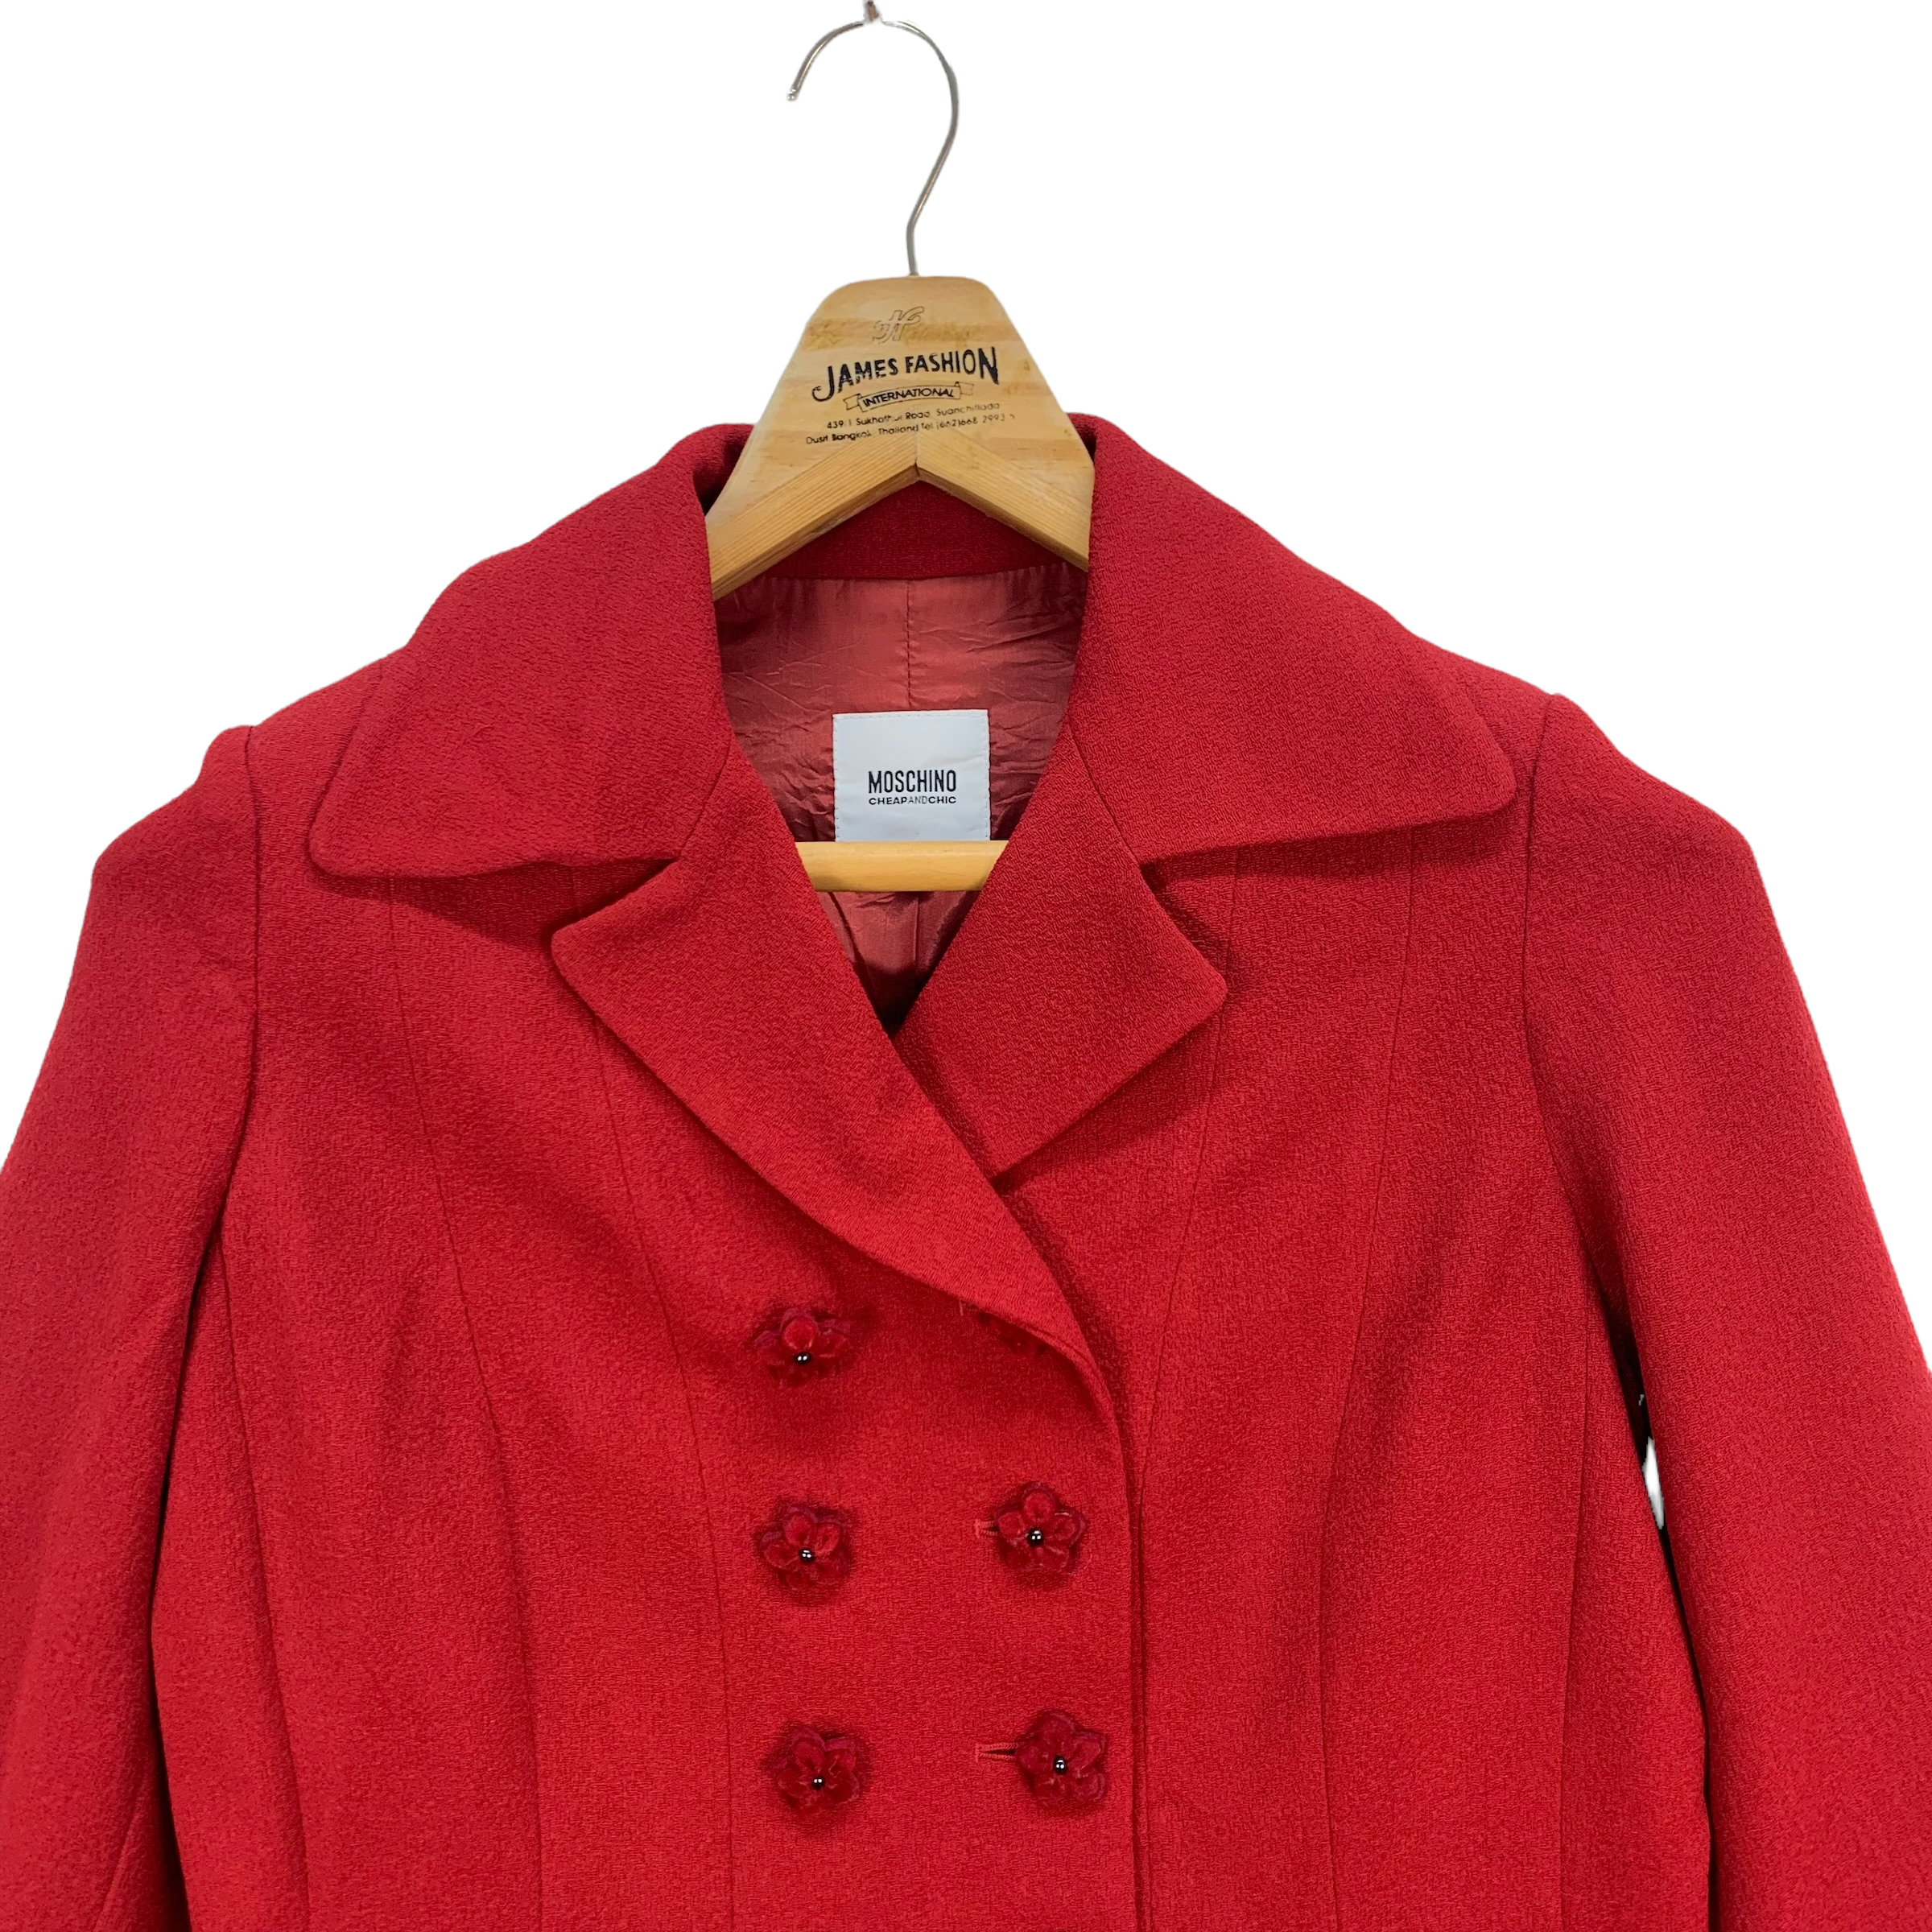 Moschino Cheap and Chic Red Double Breasted Coat #3952-137 - 2